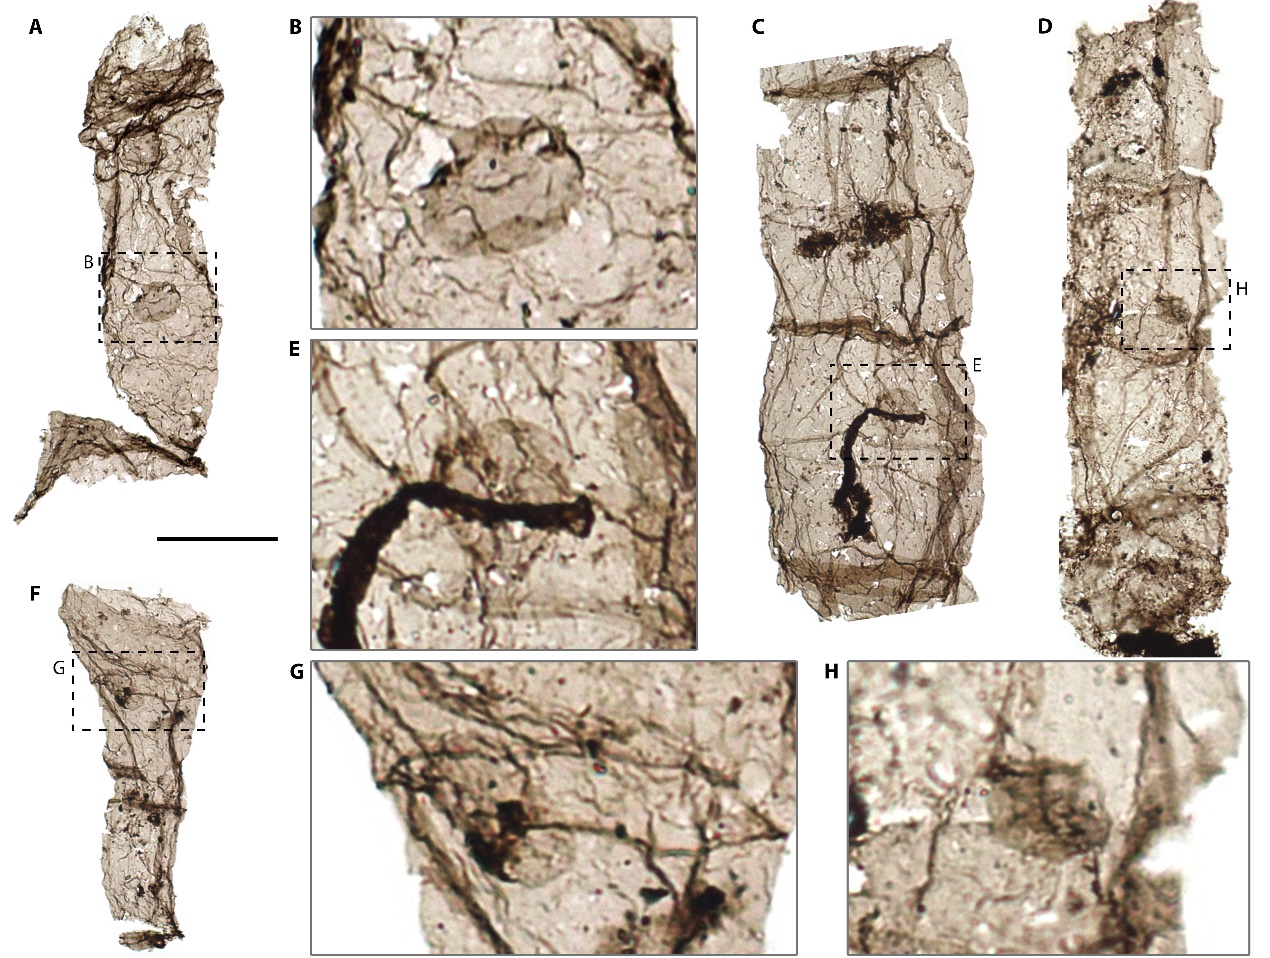 Multicellular fossil Qingshania with a round intracellular structure